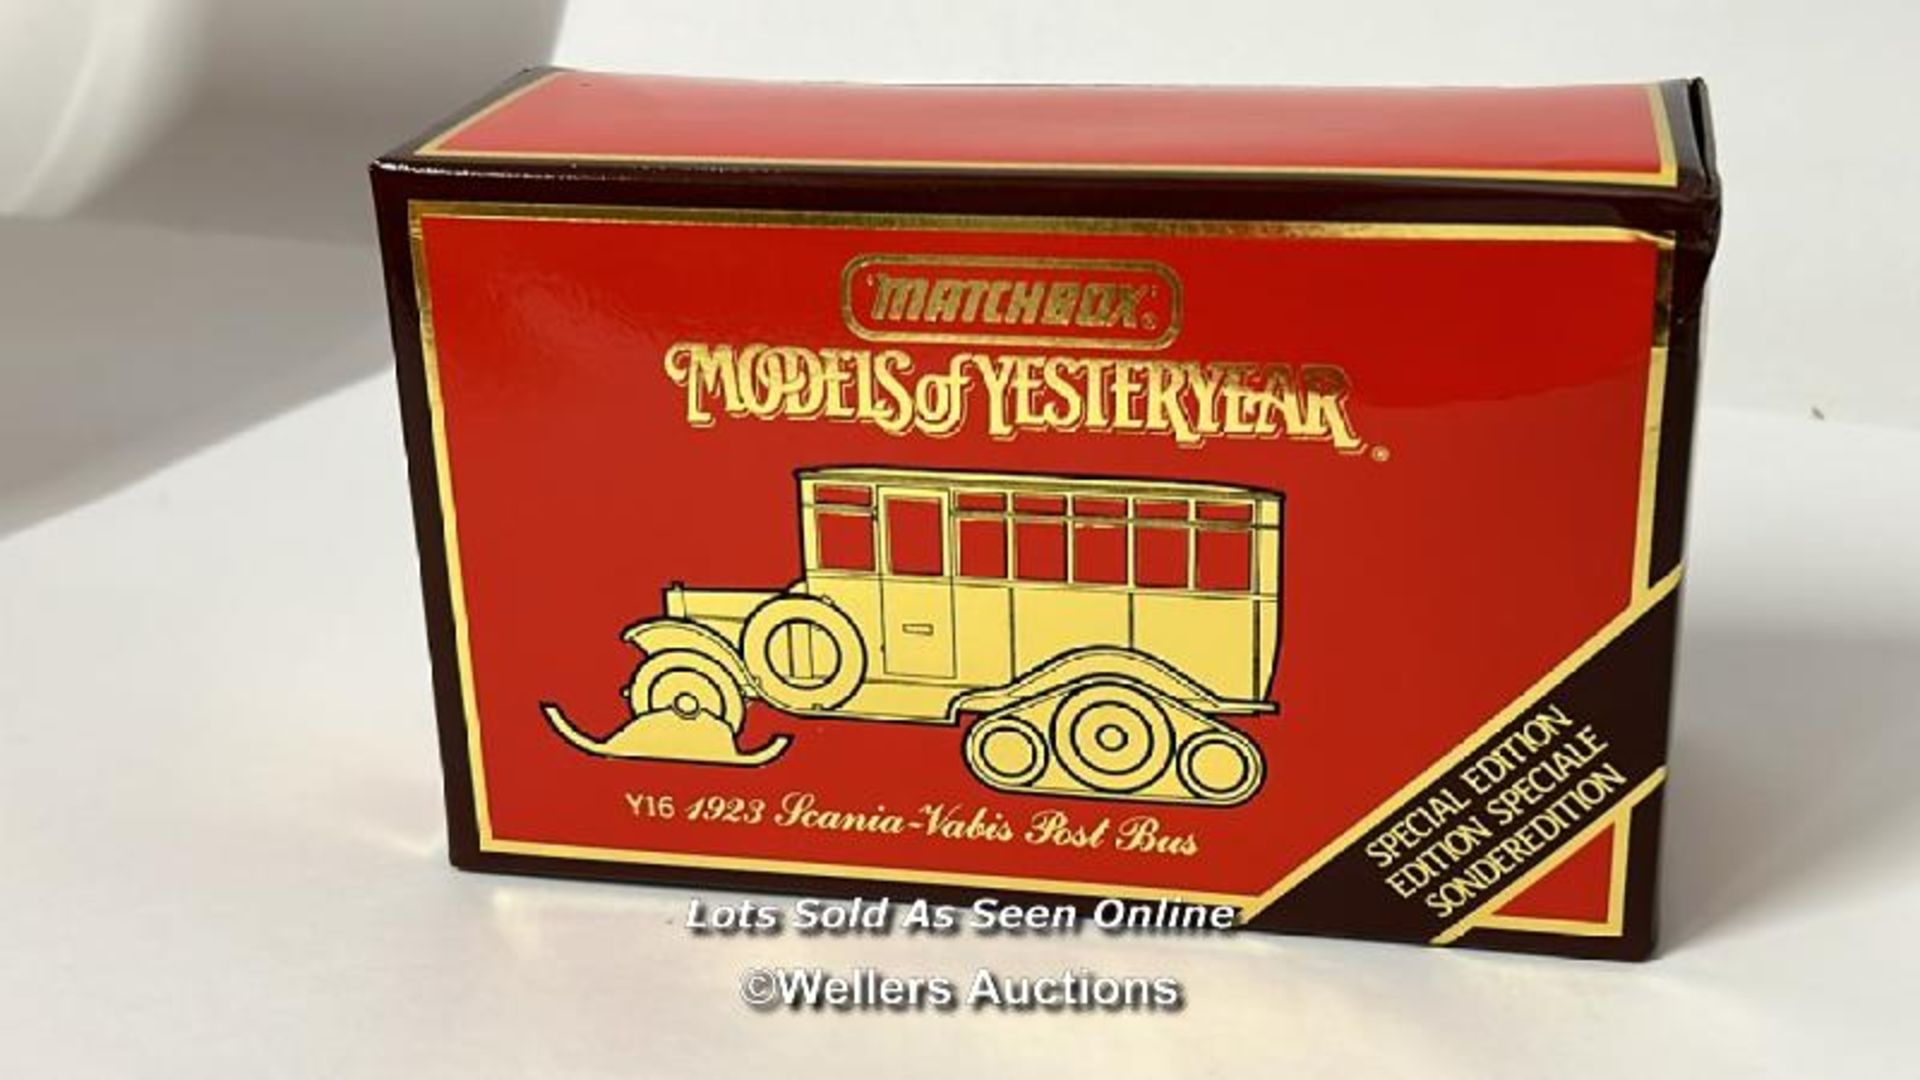 Matchbox Models of Yesteryear 1923 Scania-Vabis Post Bus Y16, rare yellow variant, limited edition - Bild 3 aus 5